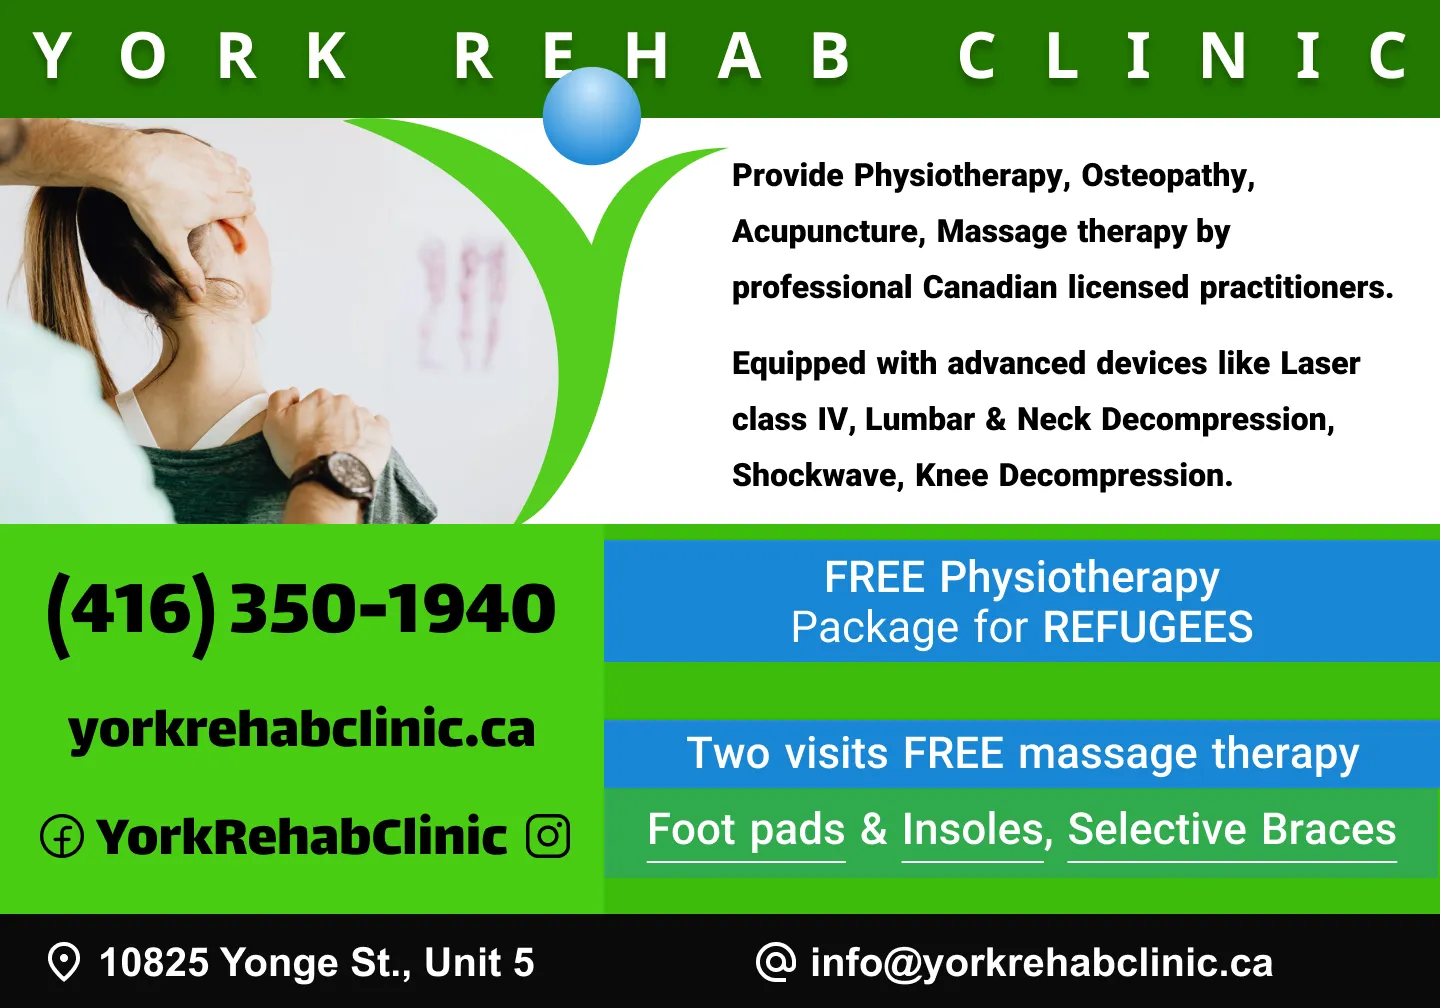 York Rehab Clinic: Providing Free Physiotherapy Services for Refugees